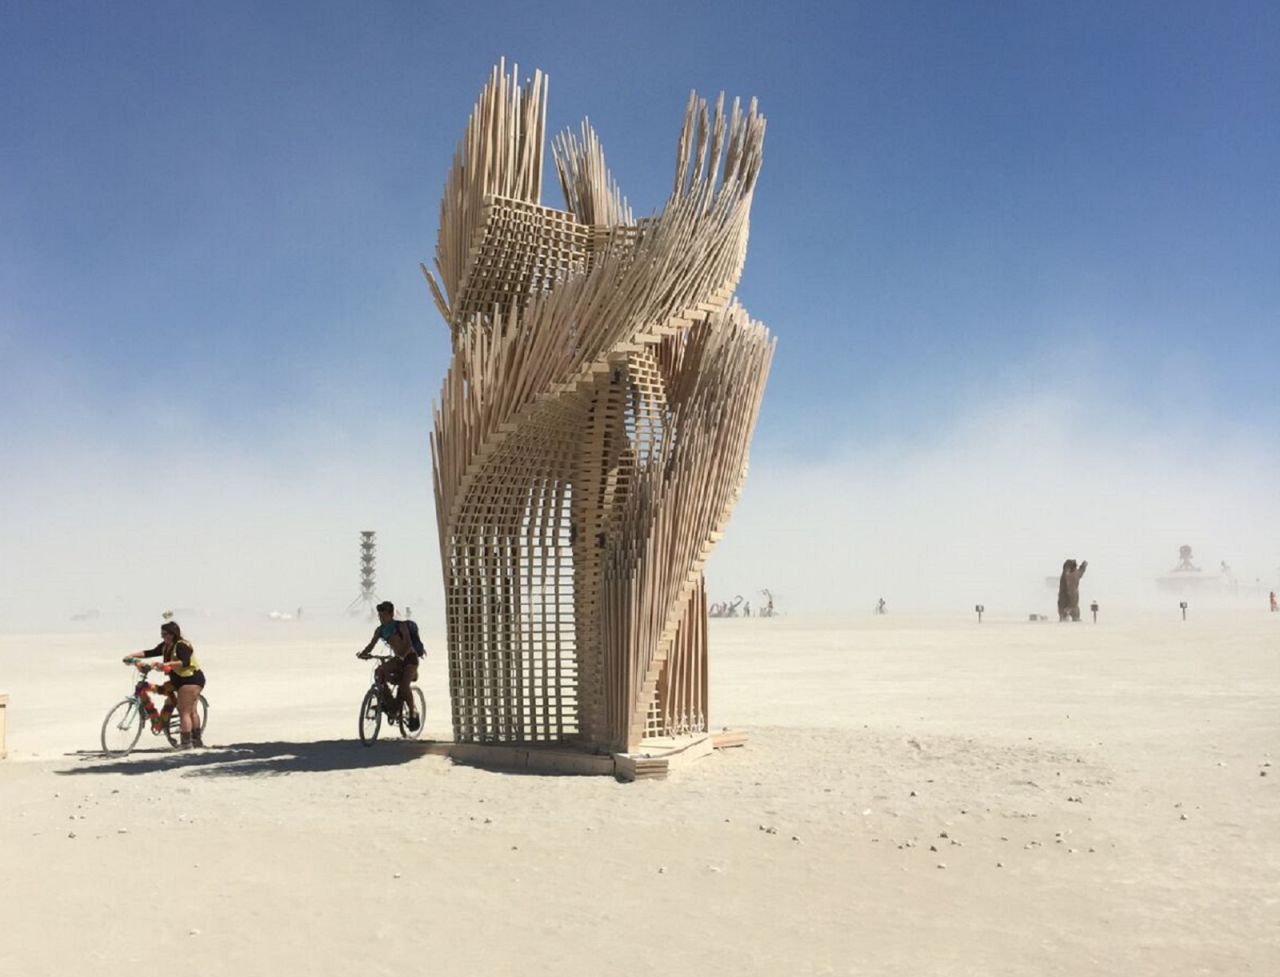 Tangential Dreams was a Mamou-Mani structure at Burning Man 2016. Digitally designed with algorithmic rules, the climbable tower was made from 1,000 thin wooden pieces held in pace by horizontal slats rotating along a central axis. This gave the impression of leaves on a tree gently moving in the wind. 